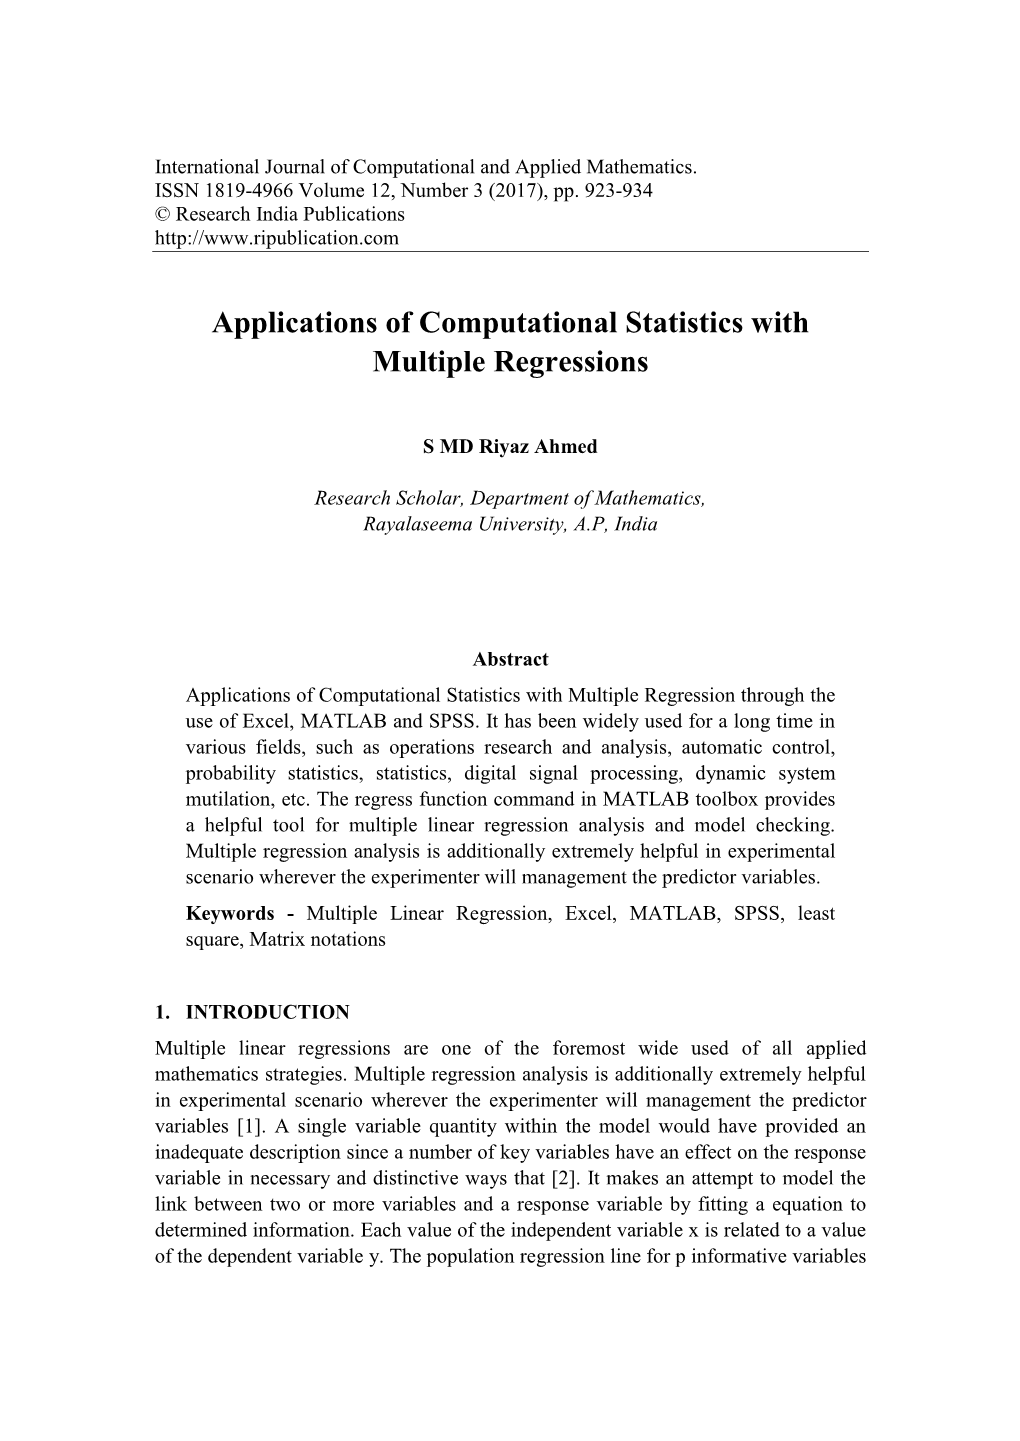 Applications of Computational Statistics with Multiple Regressions